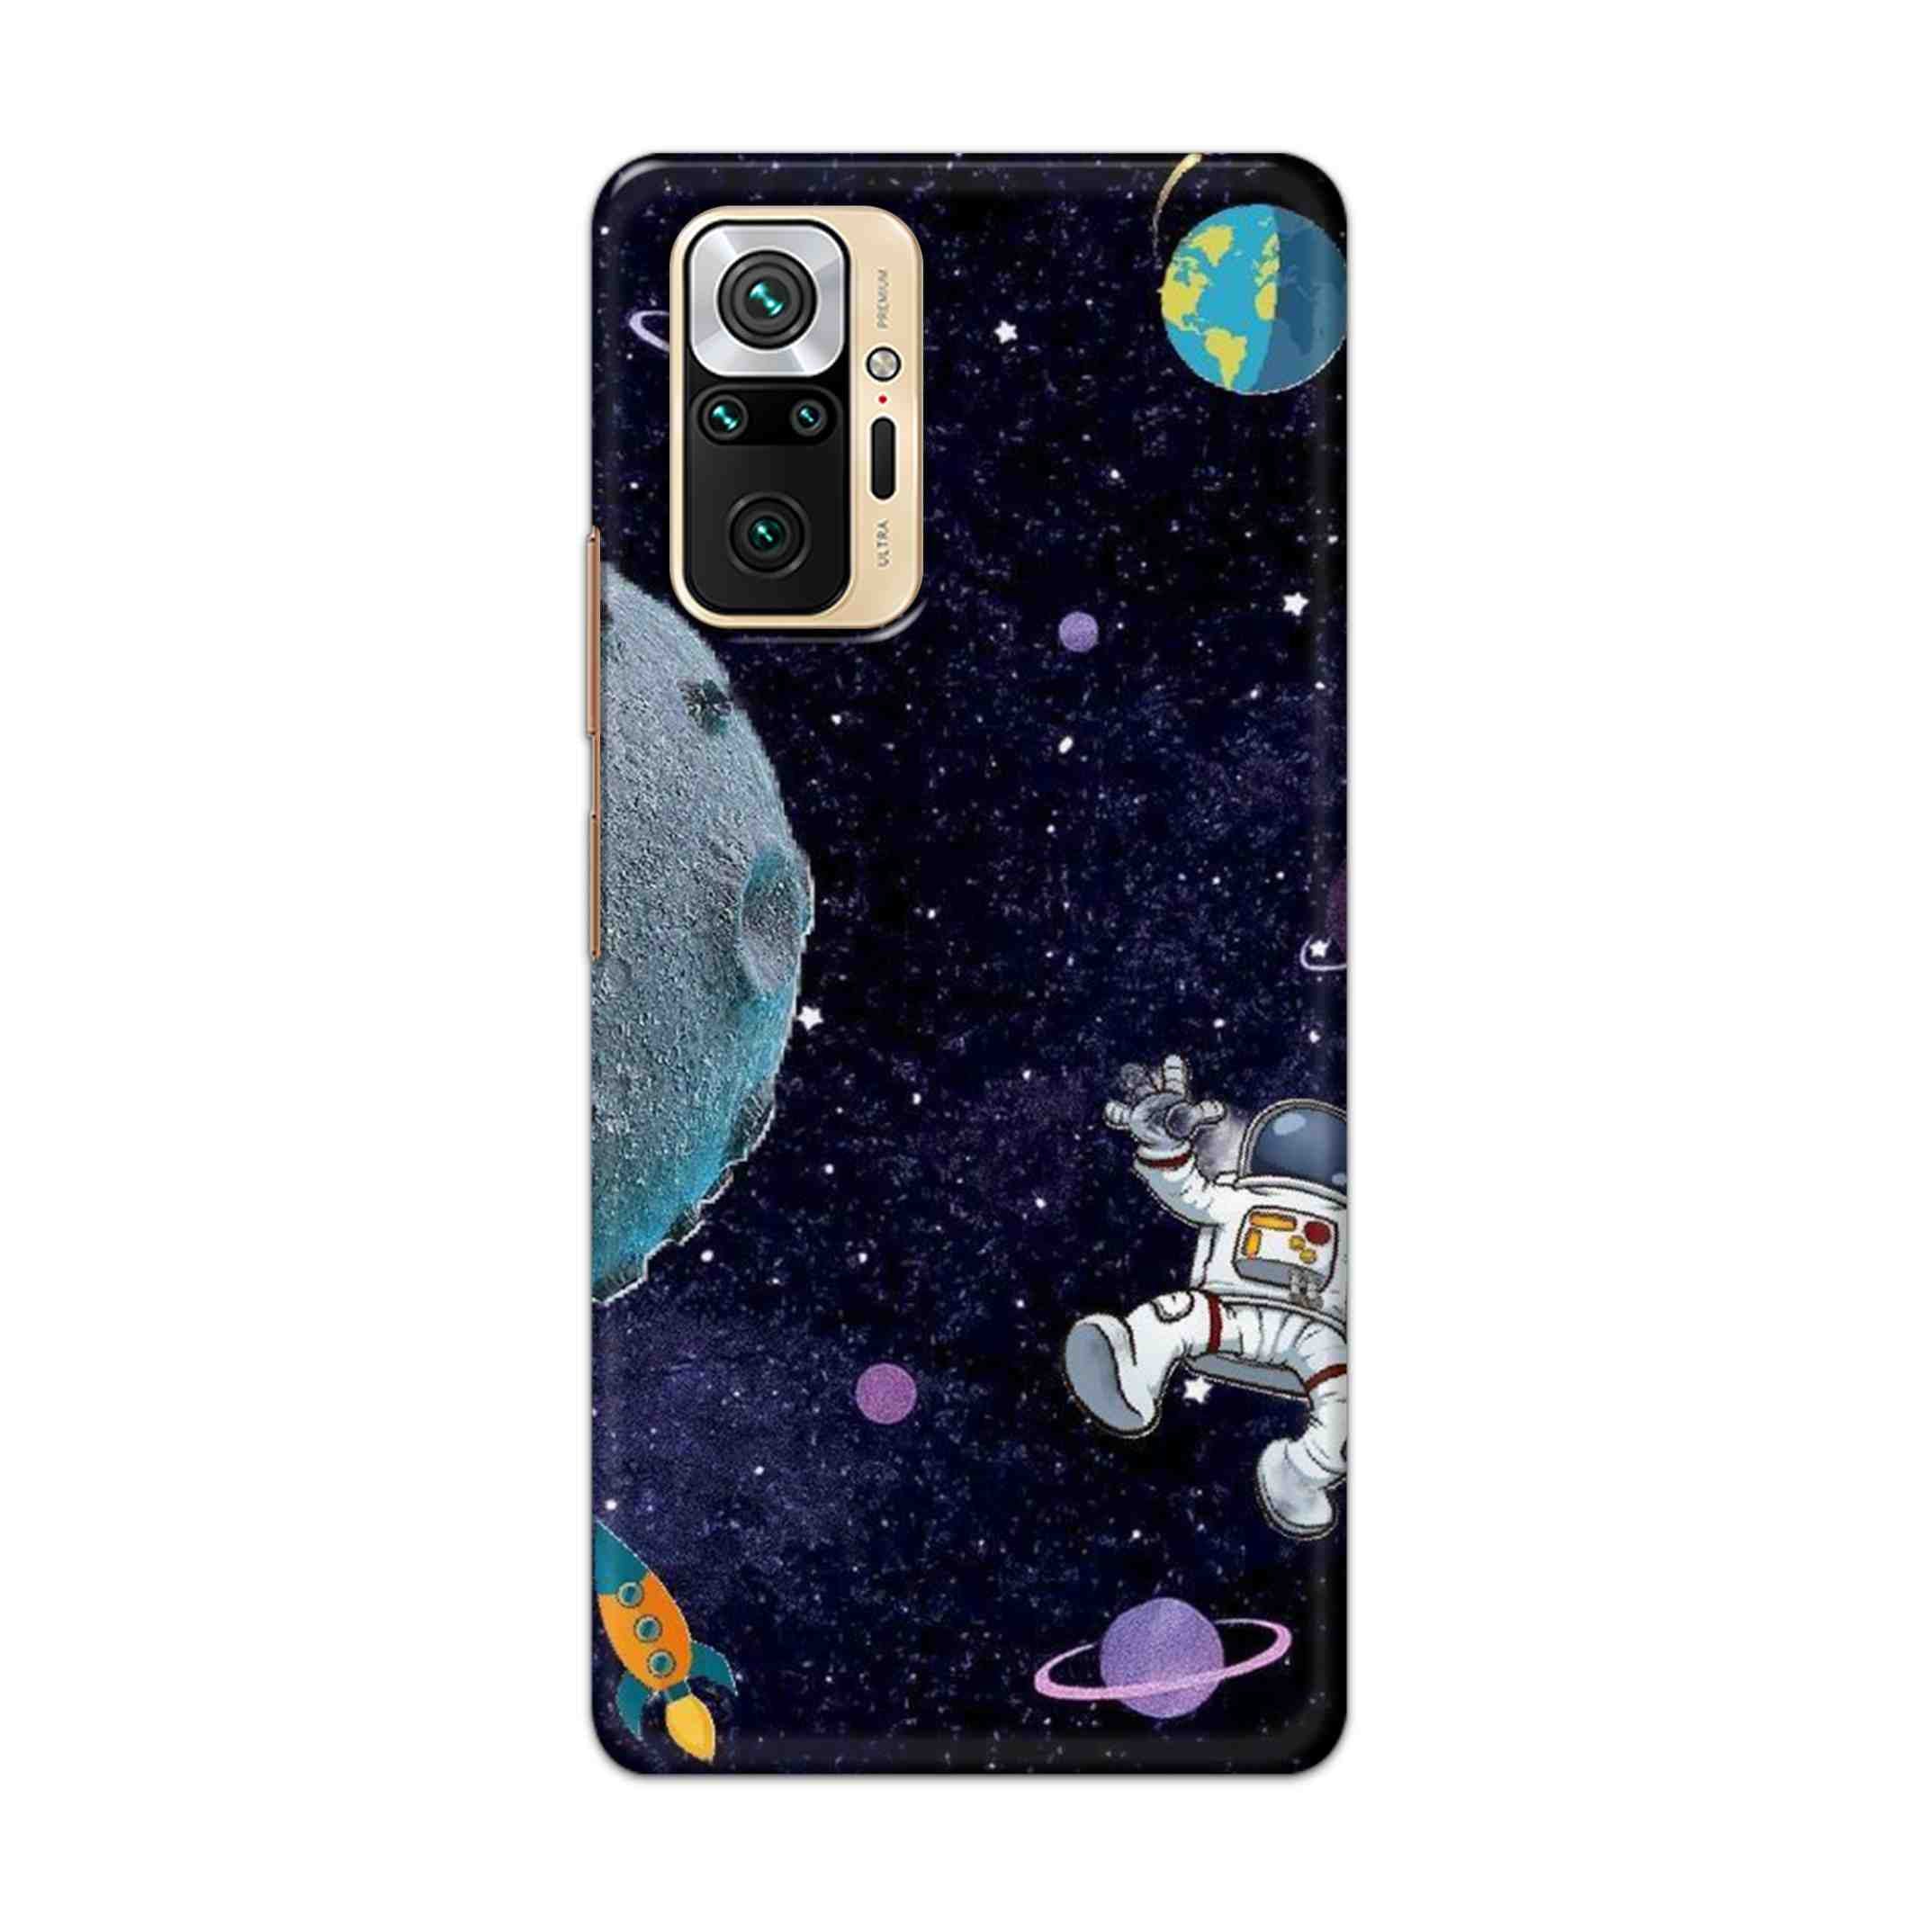 Buy Space Hard Back Mobile Phone Case Cover For Redmi Note 10 Pro Online